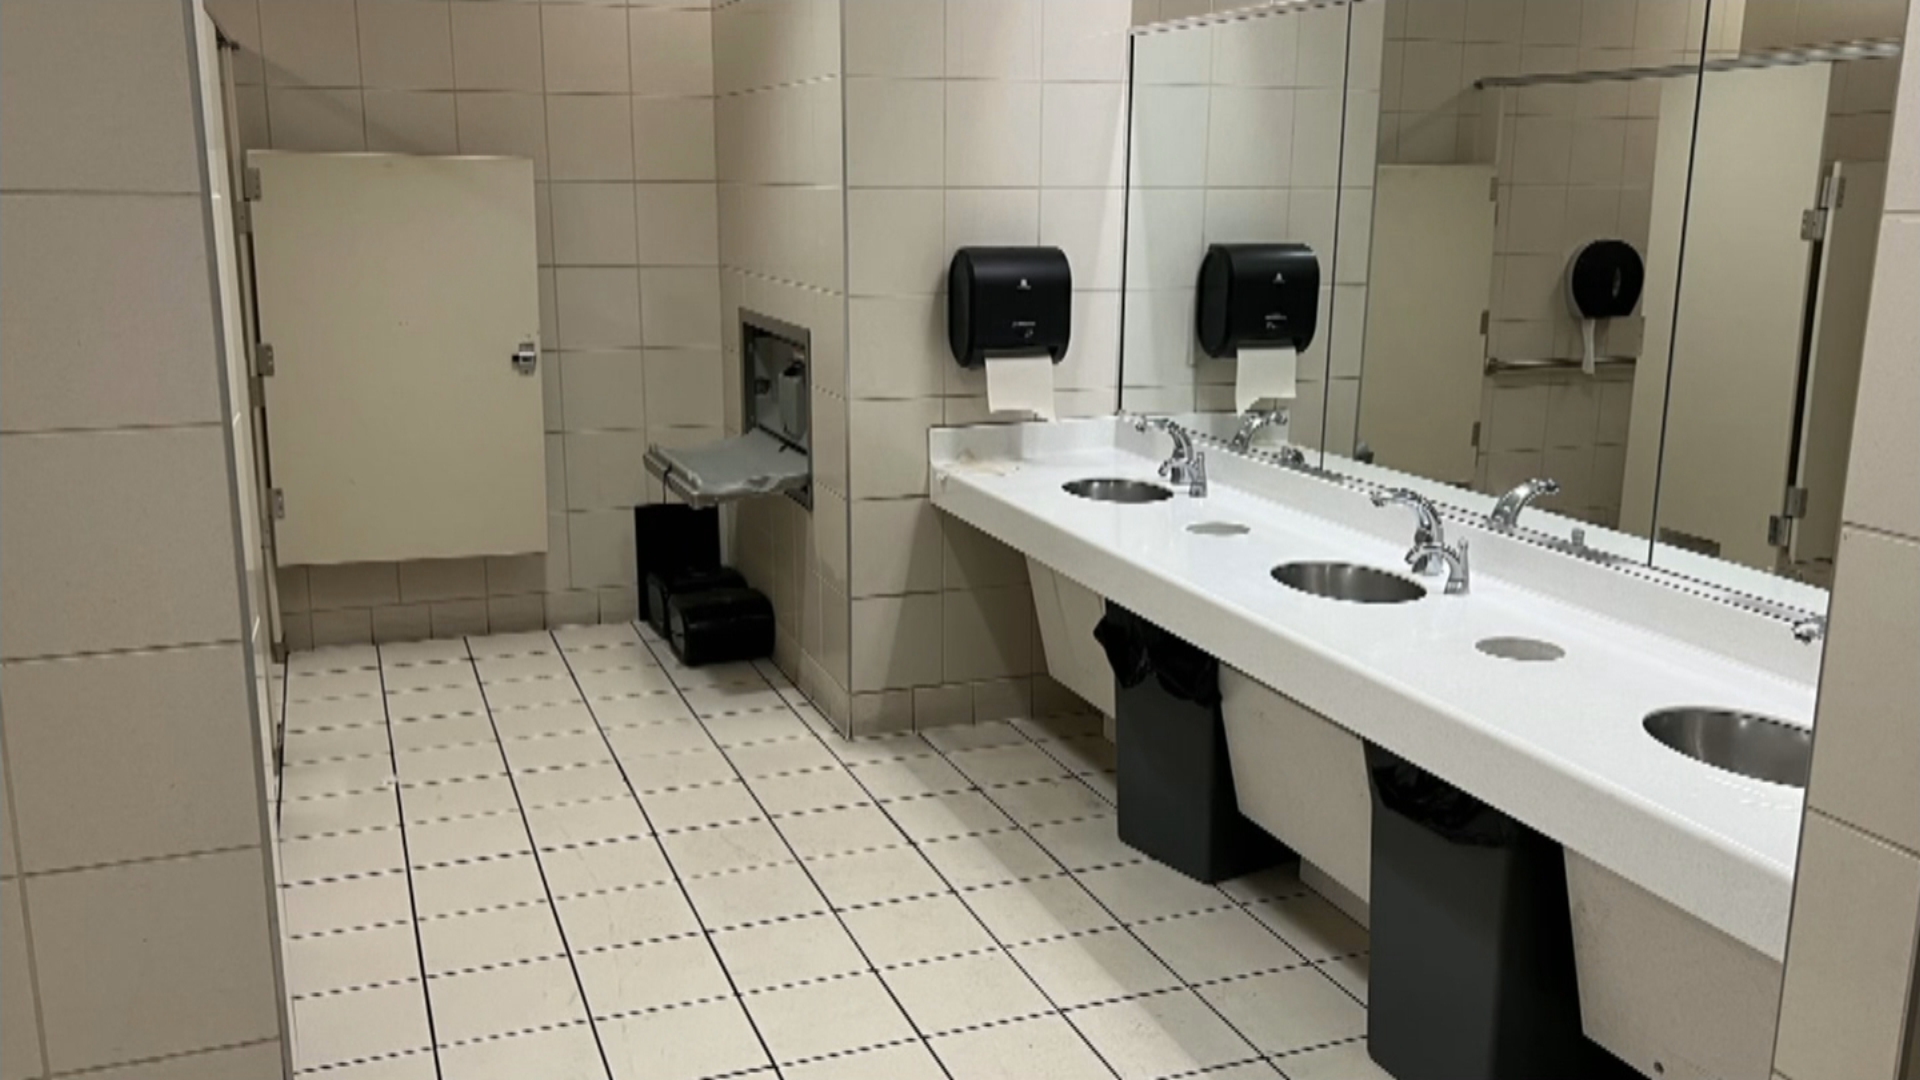 Philadelphia International Airport Continuing Bathroom Renovation Thanks To Funding From Infrastructure Law – CBS Philly